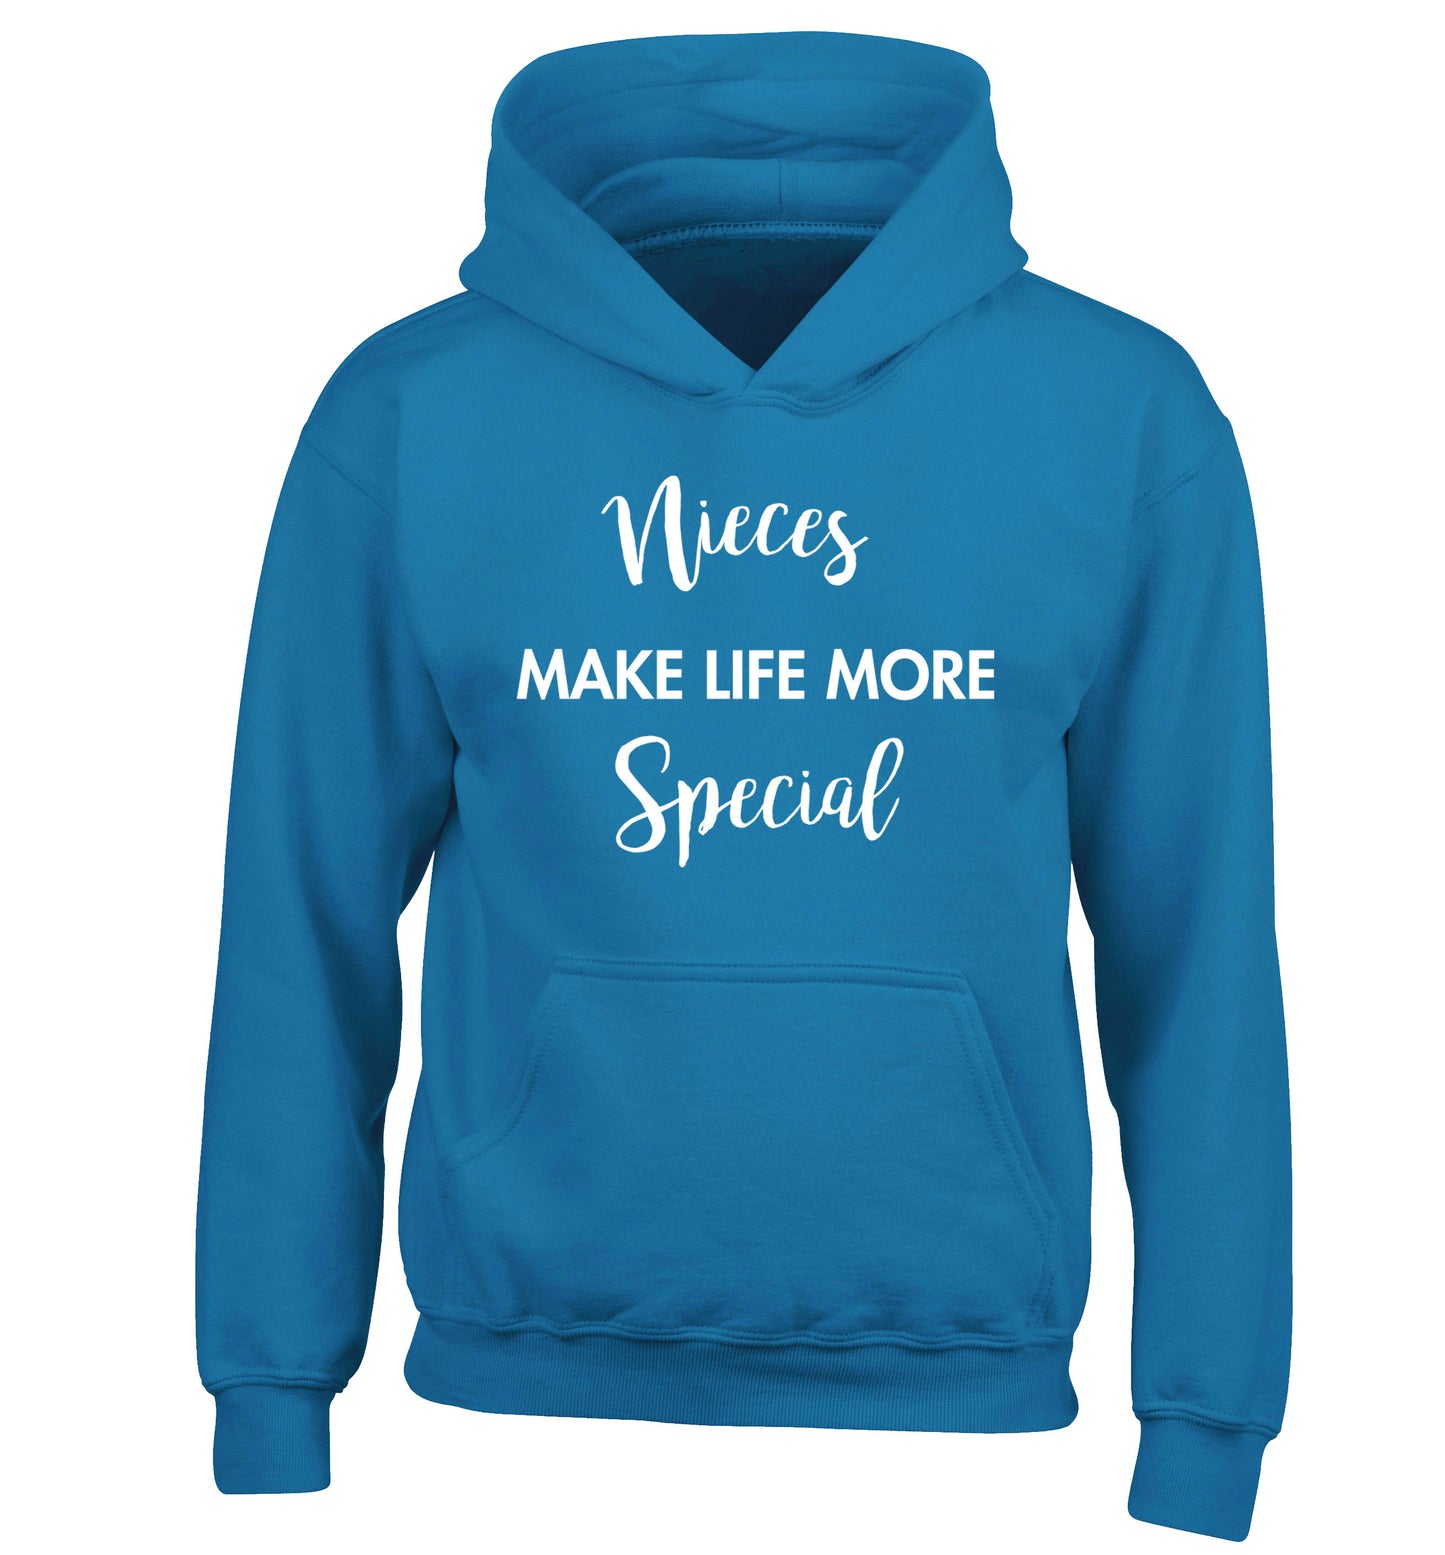 Nieces make life more special children's blue hoodie 12-14 Years